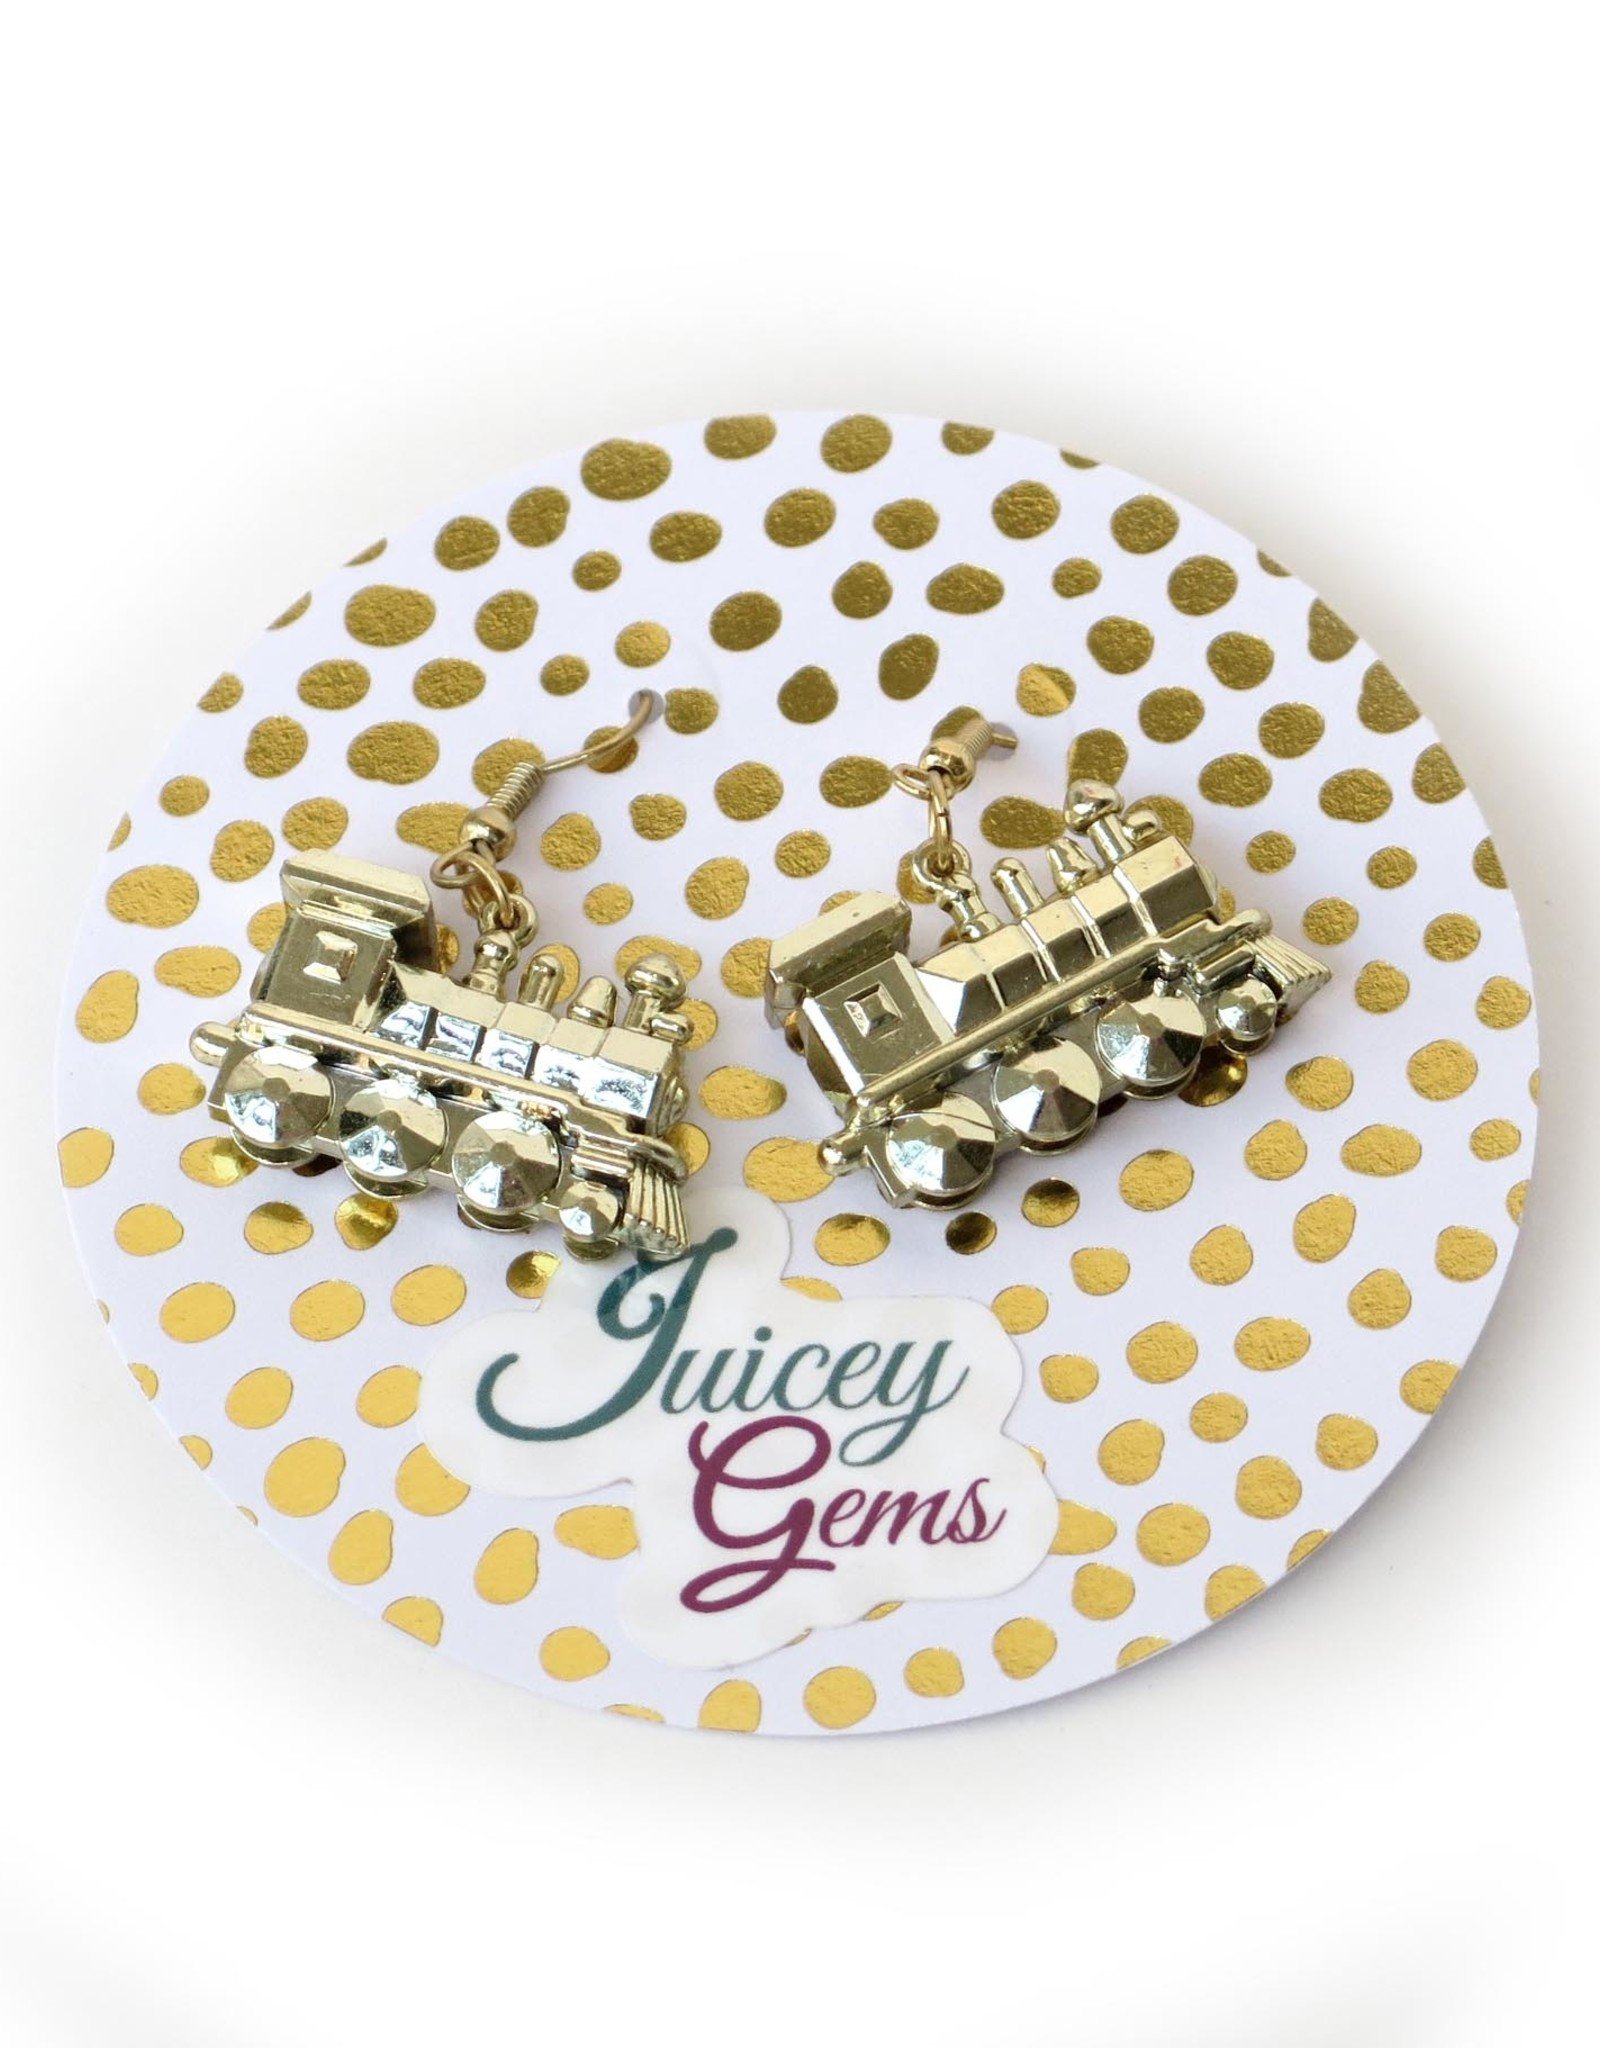 Juicey Gems Gold Train Holiday Earrings by Juicey Gems